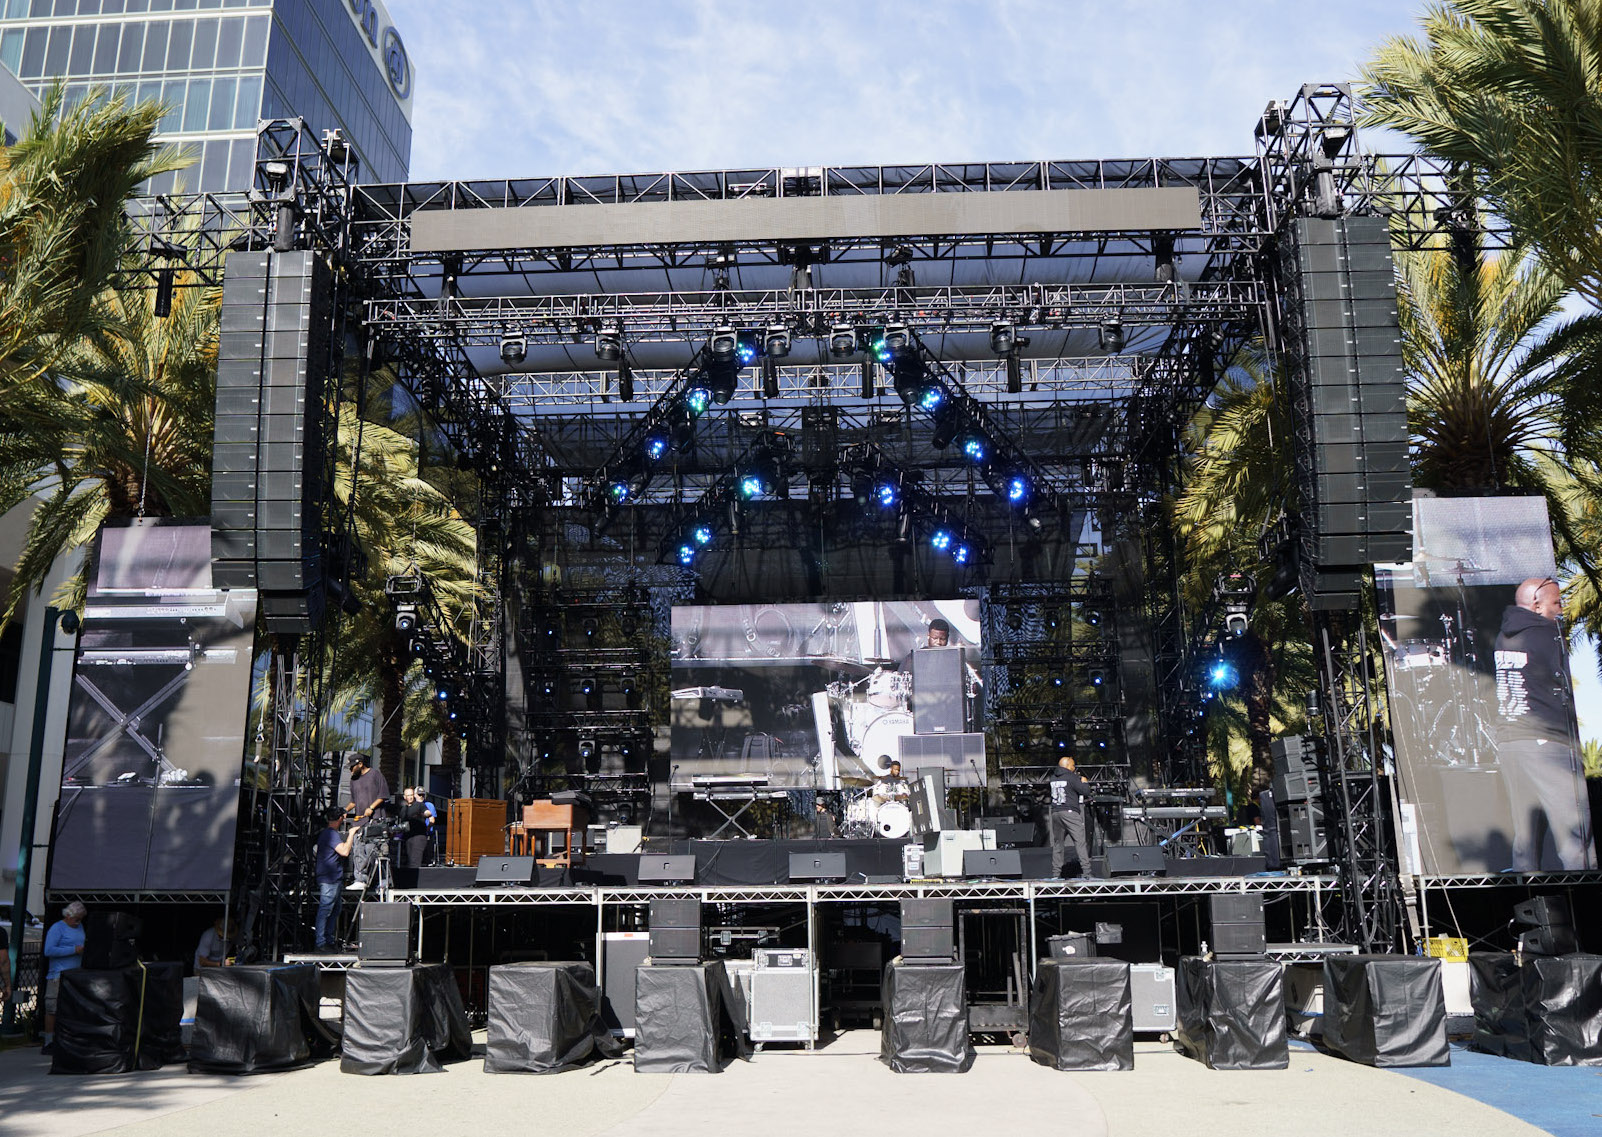 NEXO STM system provides sound for an audience of audio professionals